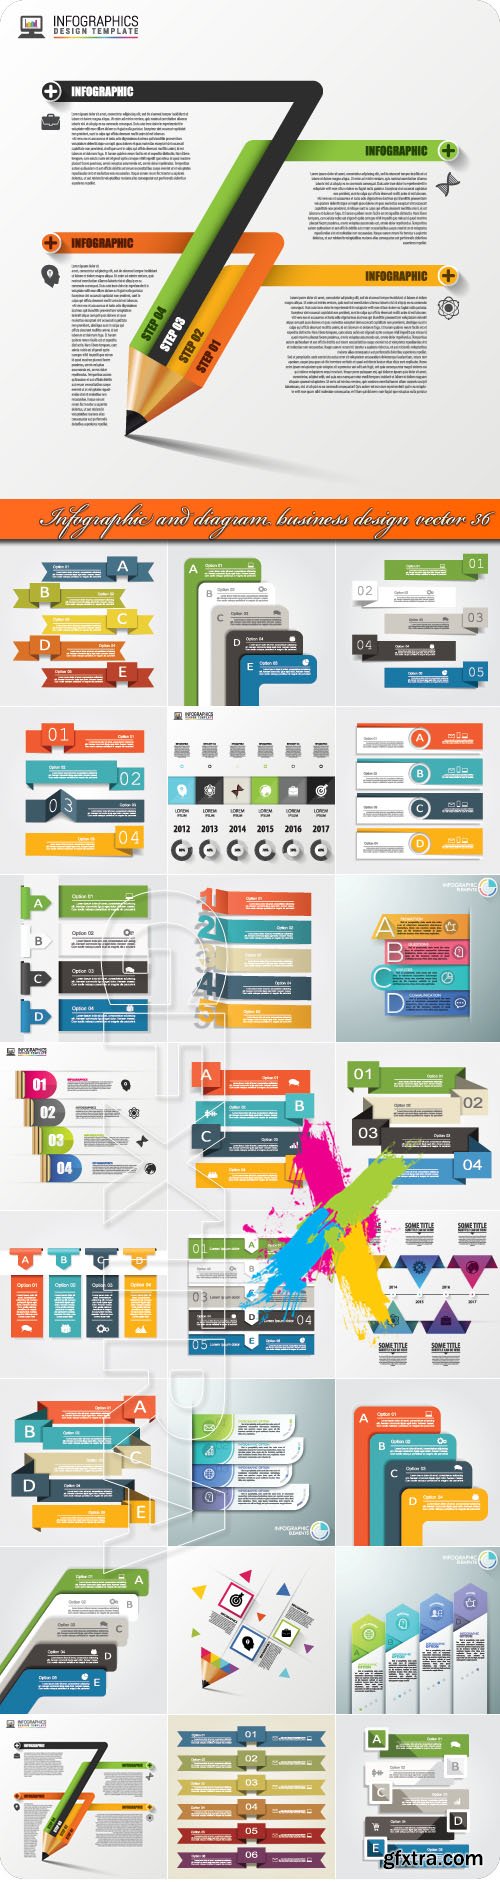 Infographic and diagram business design vector 36